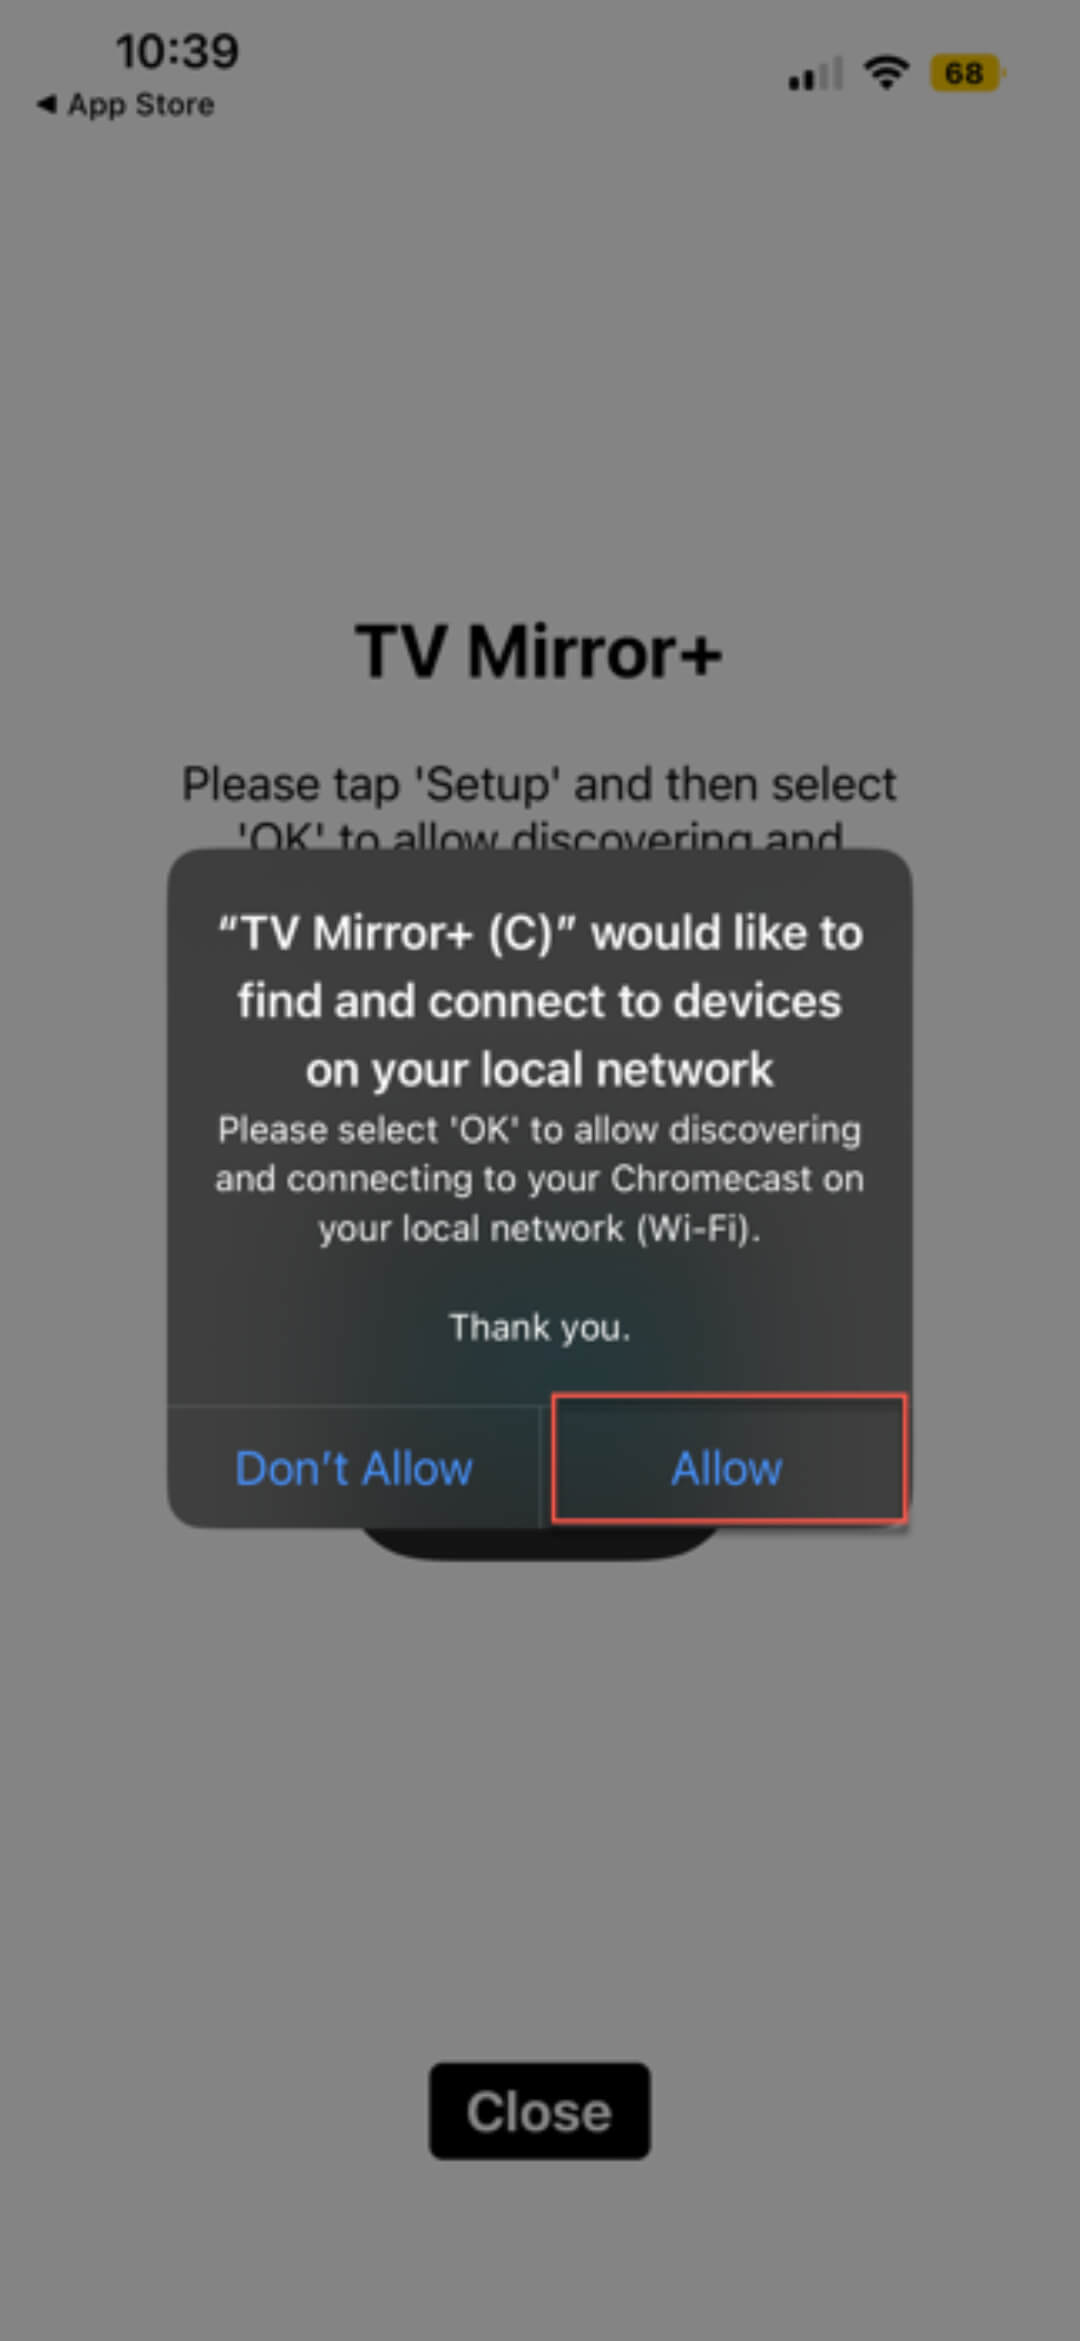 Click Allow to grant TV Mirror+ permission to access devices